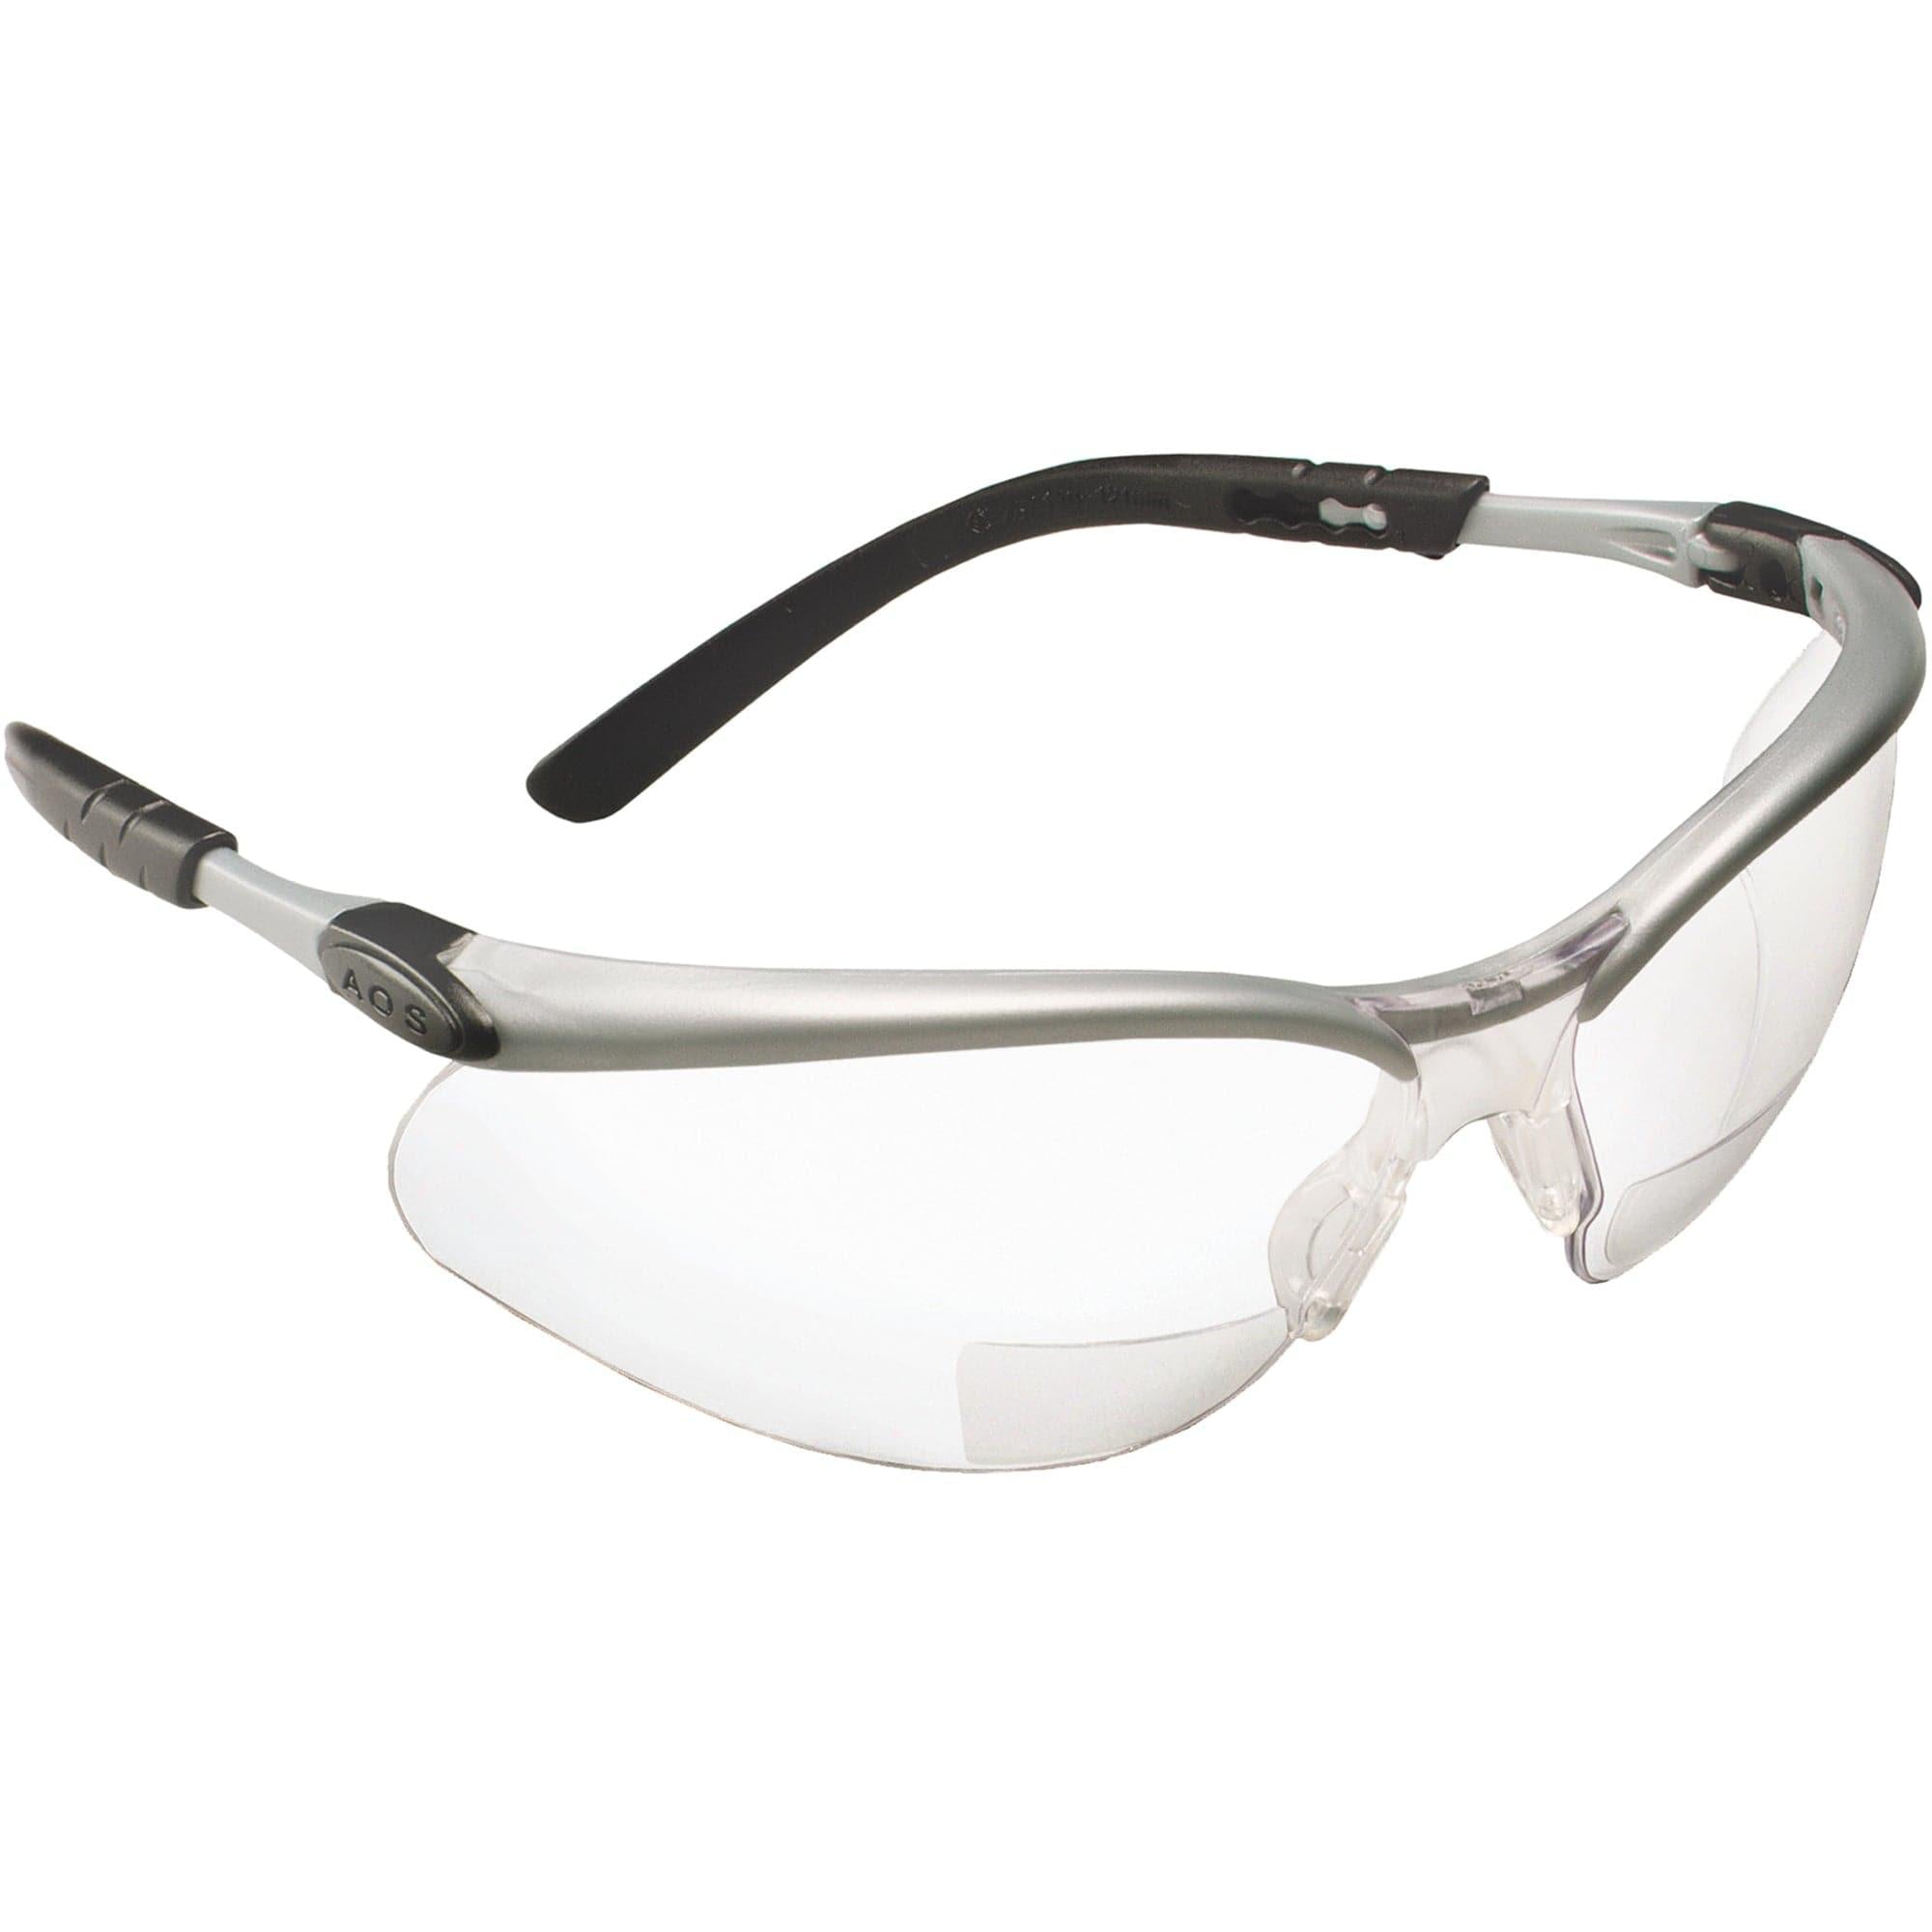 3M safety glasses with reading glasses